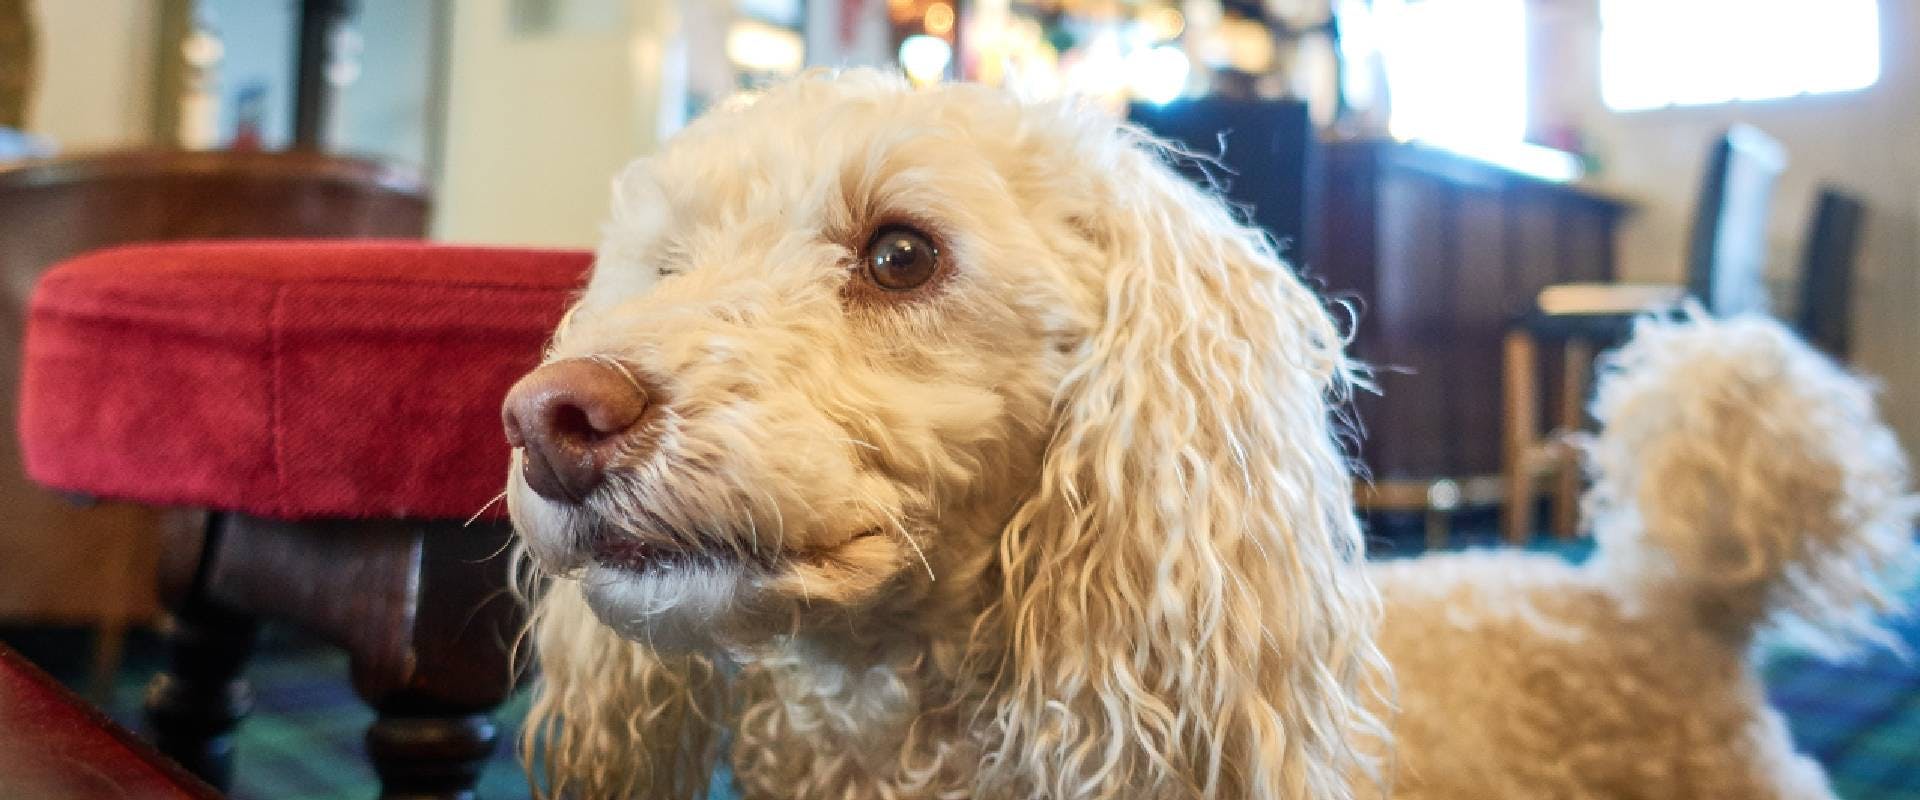 Miniature Poodle Pedigree Dog in Traditional Pub Close up with Tail up in the air